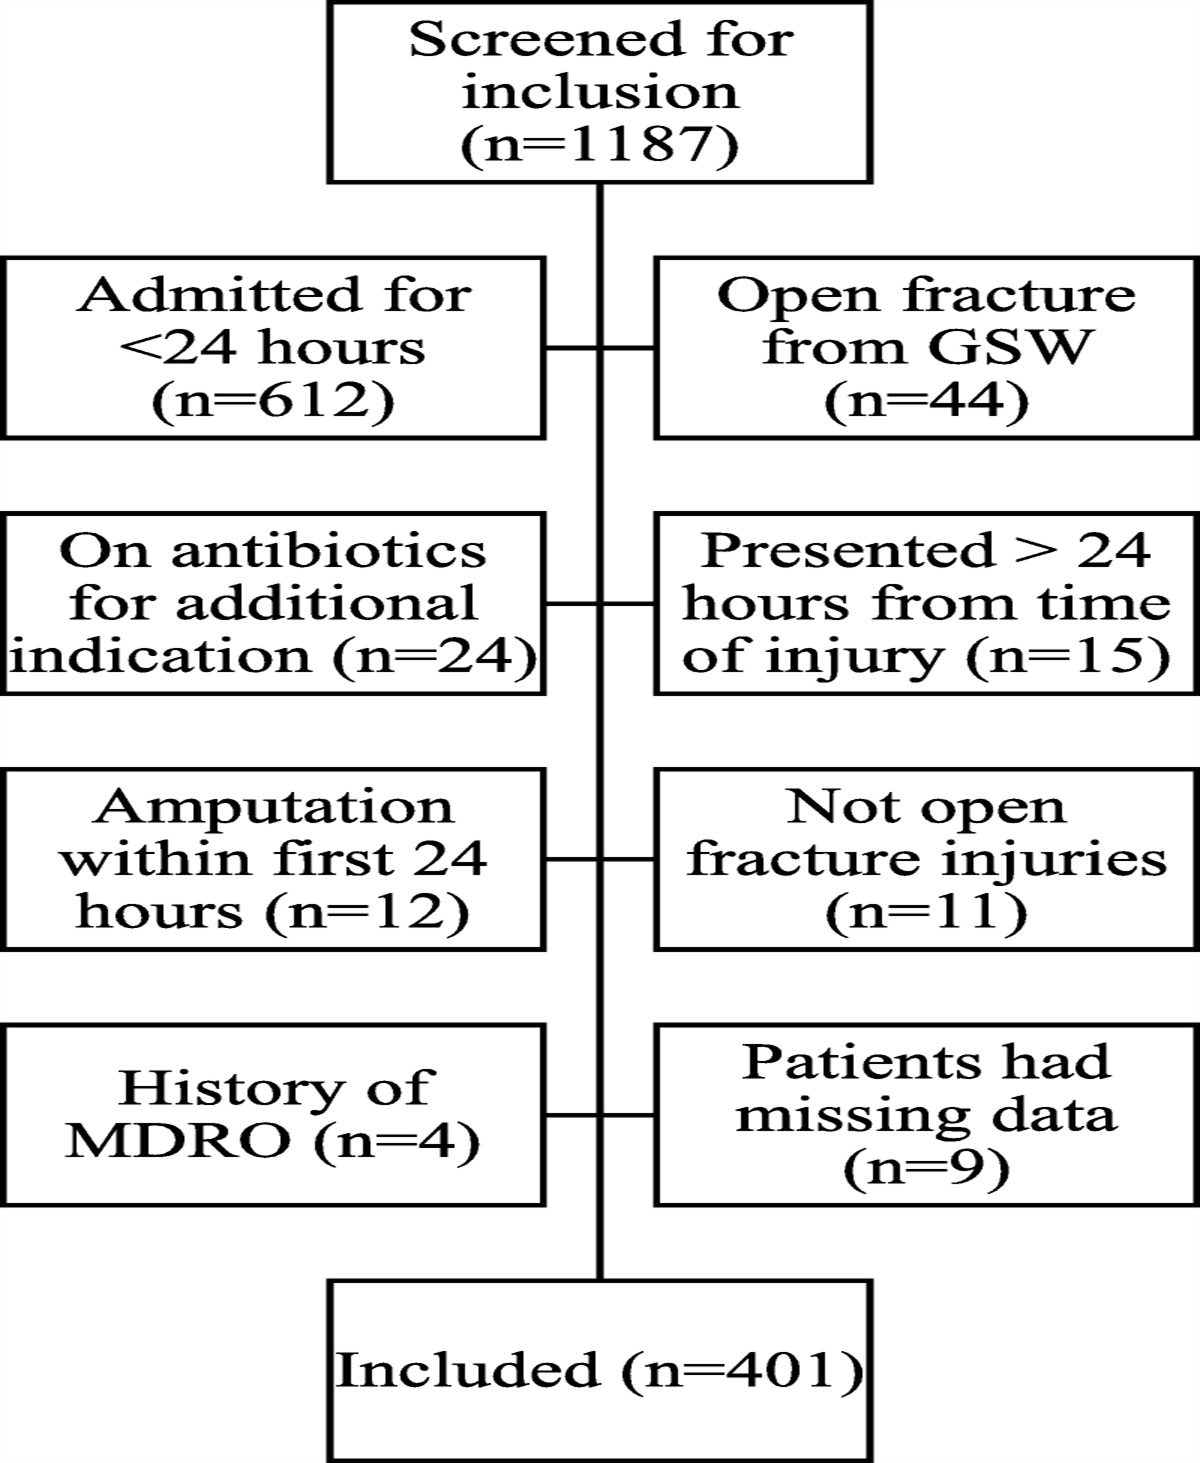 Risk Factors Associated With Open Fracture Complications Following Antibiotic Prophylaxis